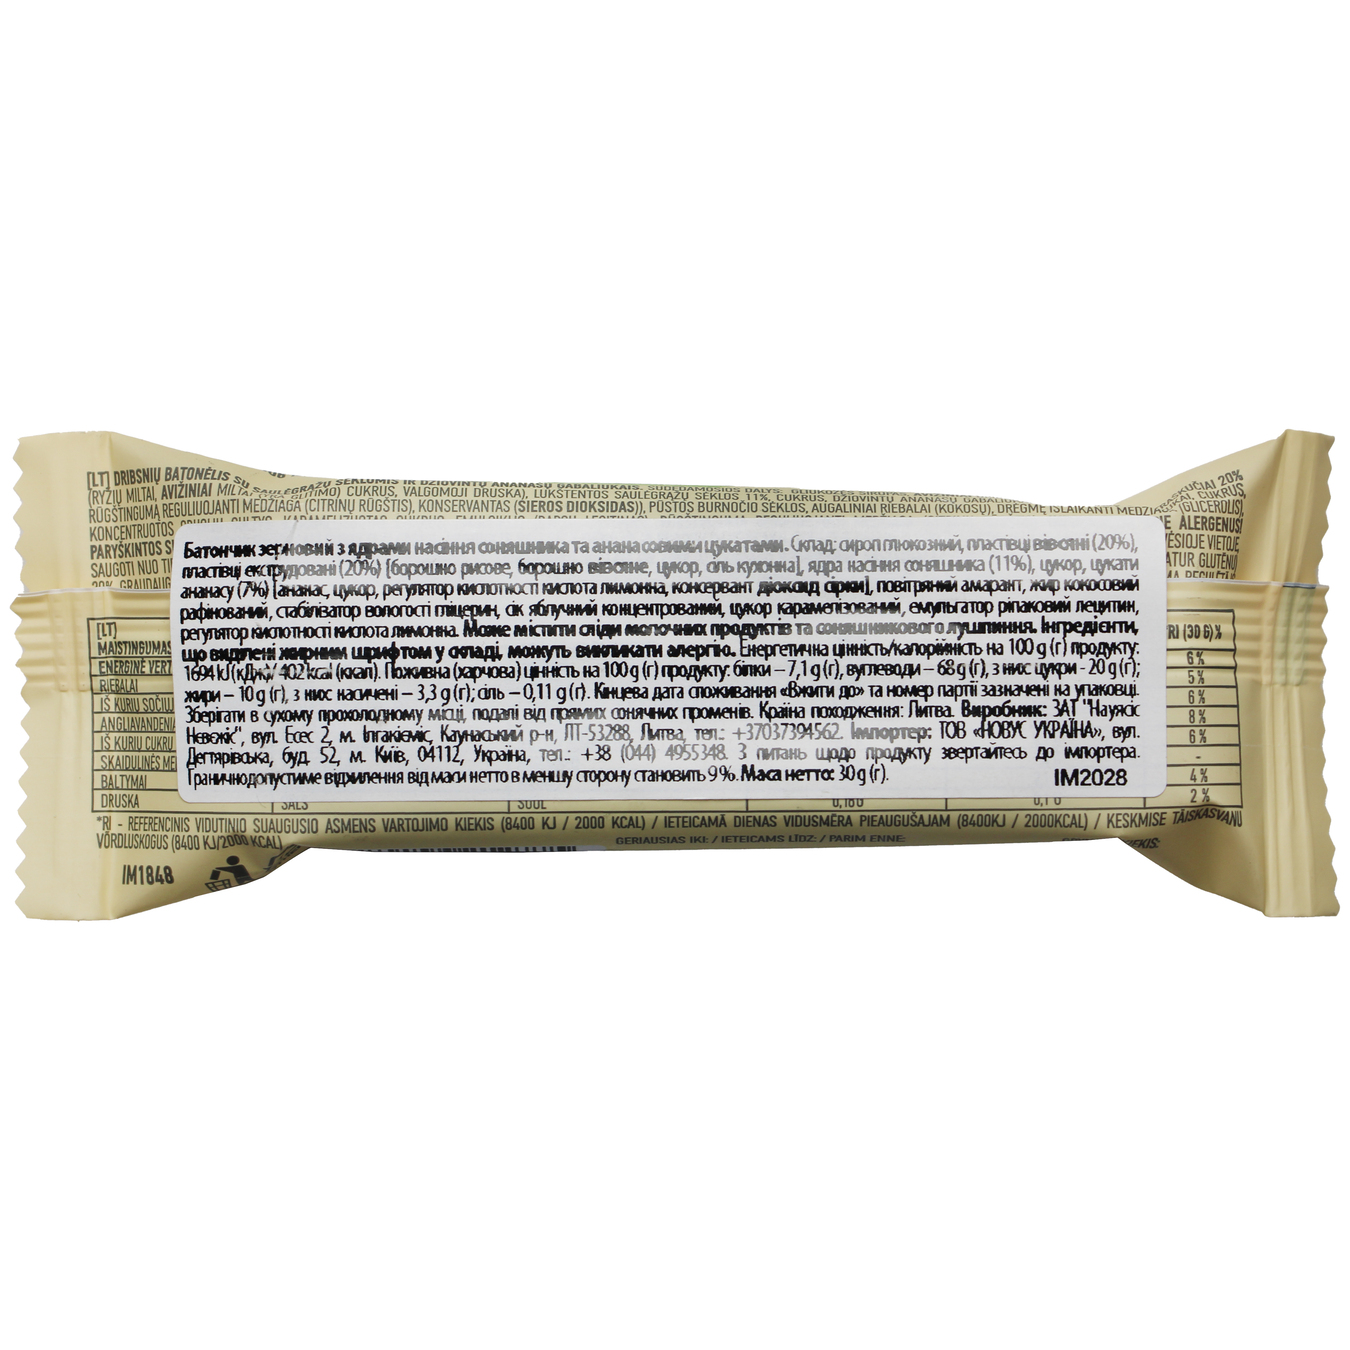 OHO Natur Life With Seeds And Pineapple Cereal Bar 30g 2